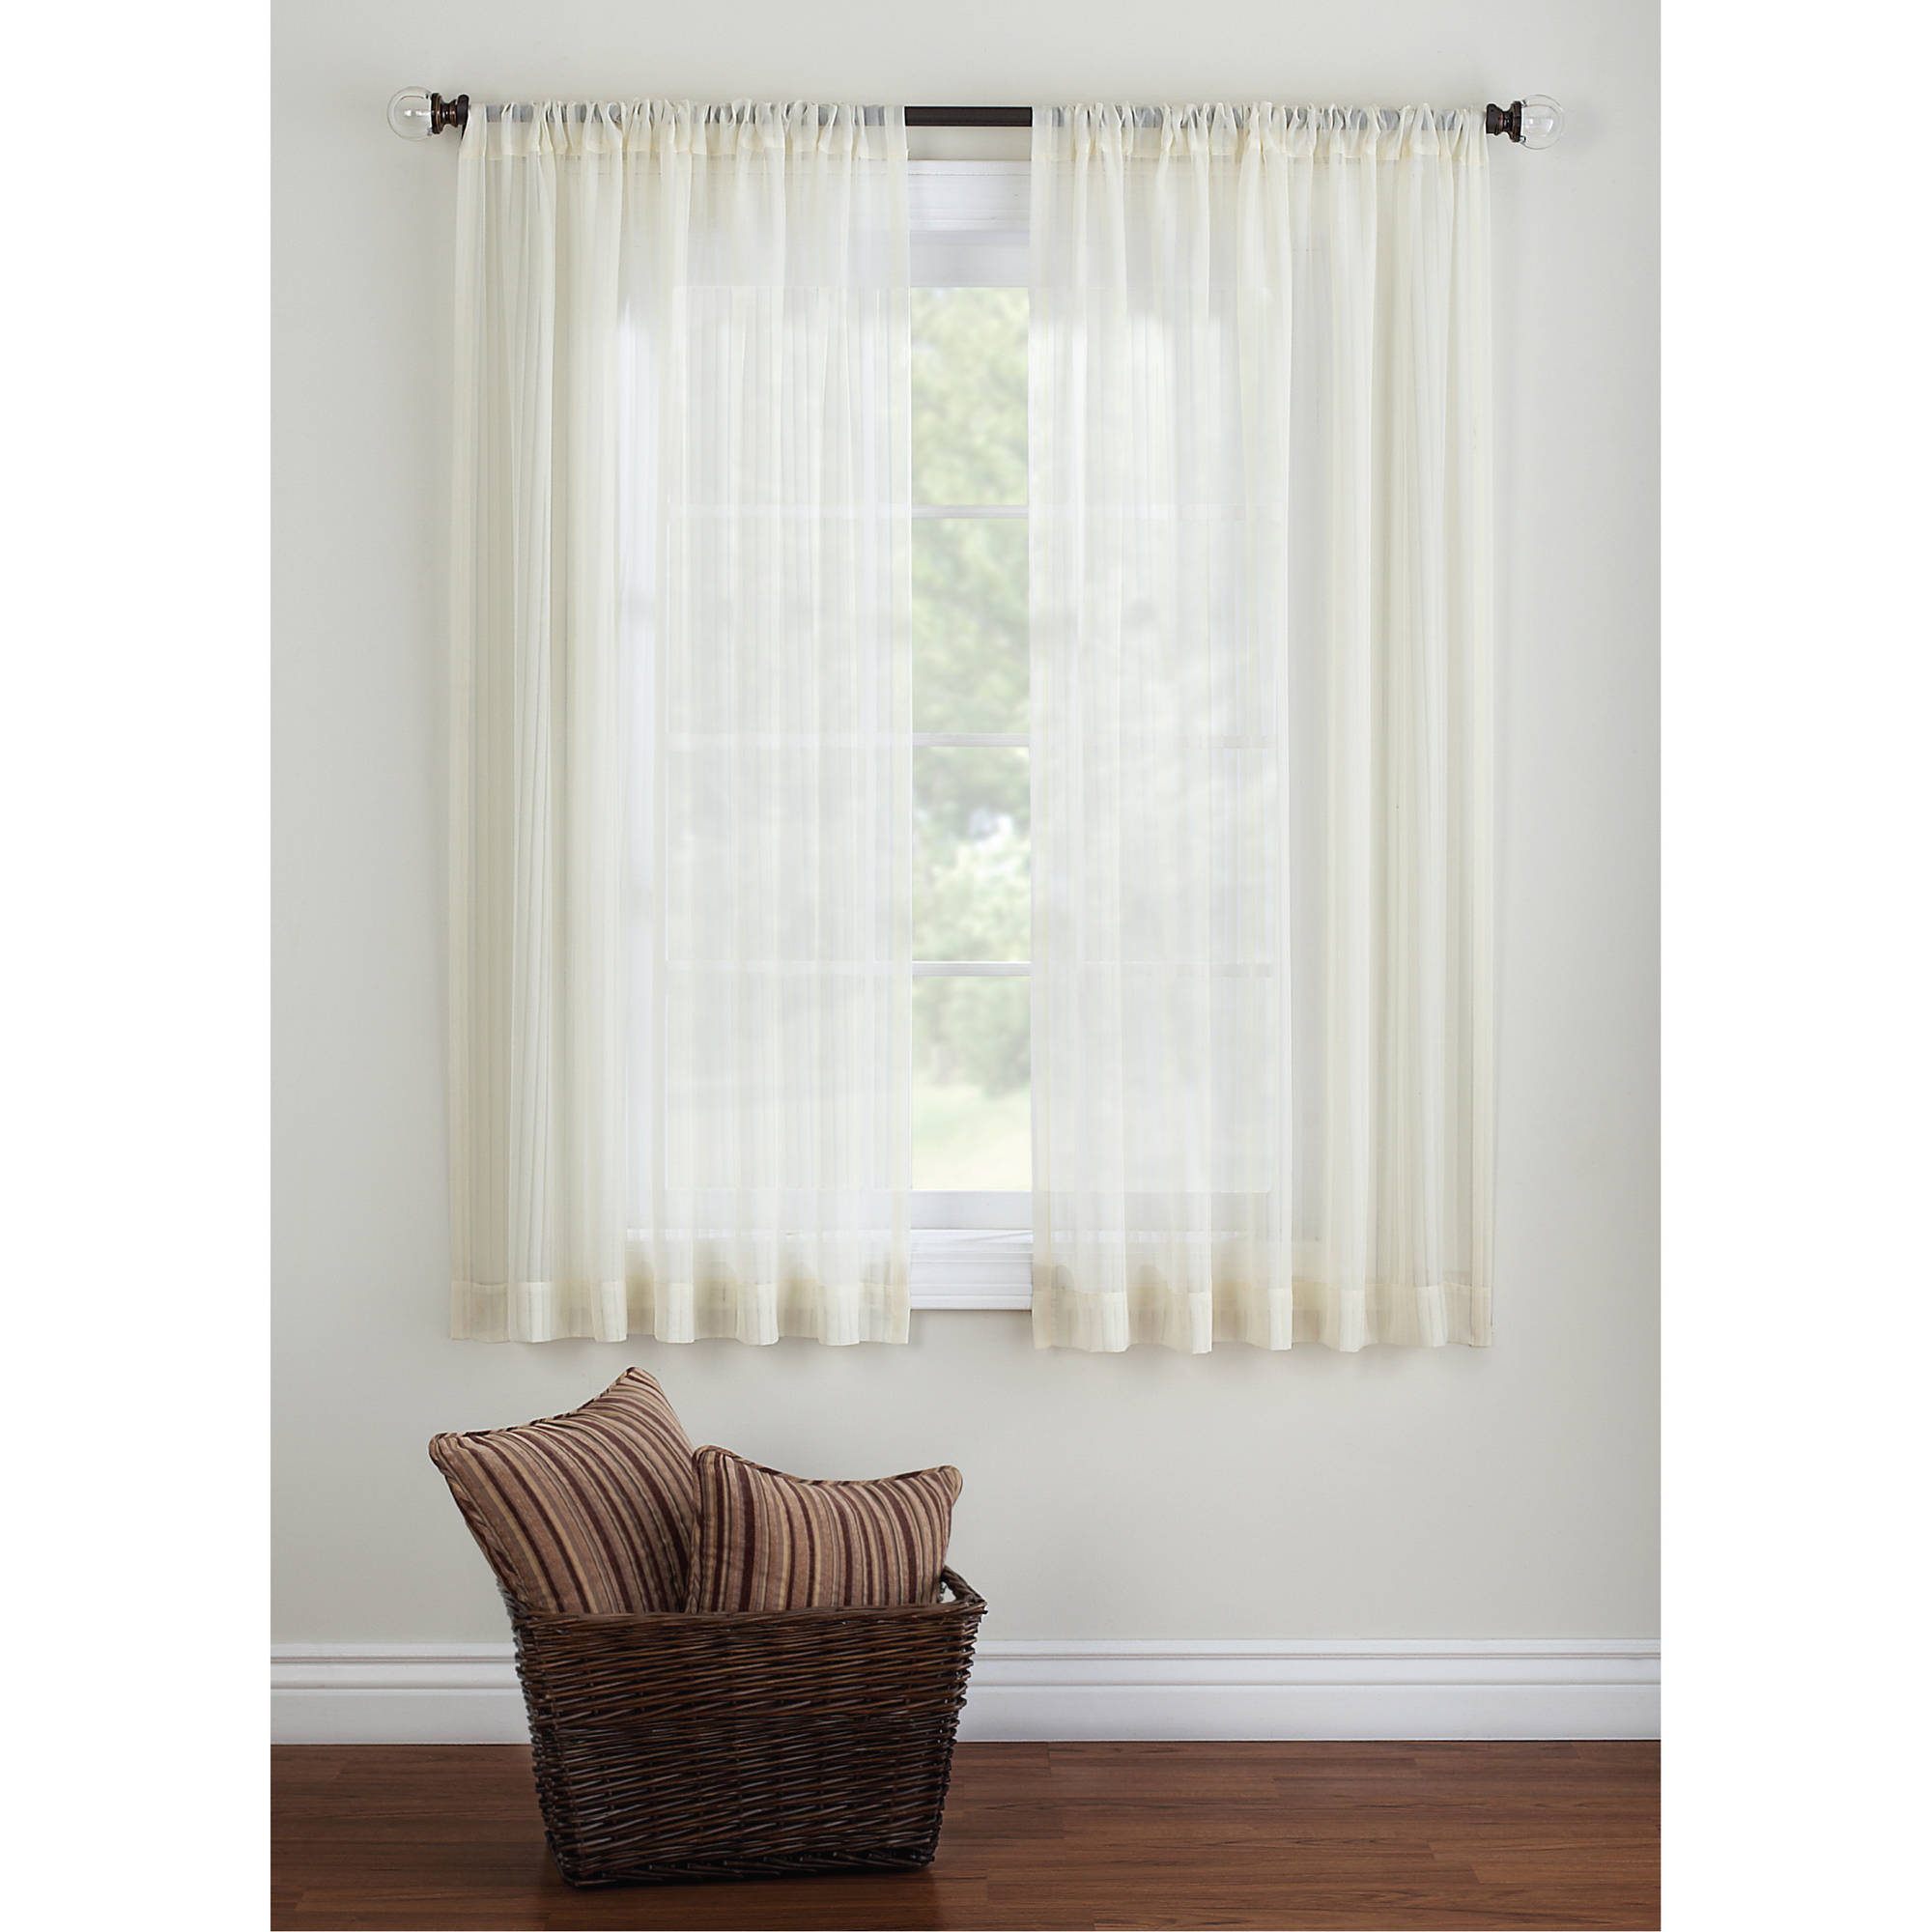 Better Homes and Gardens Elise Woven Stripe Sheer Window Panel - image 2 of 2